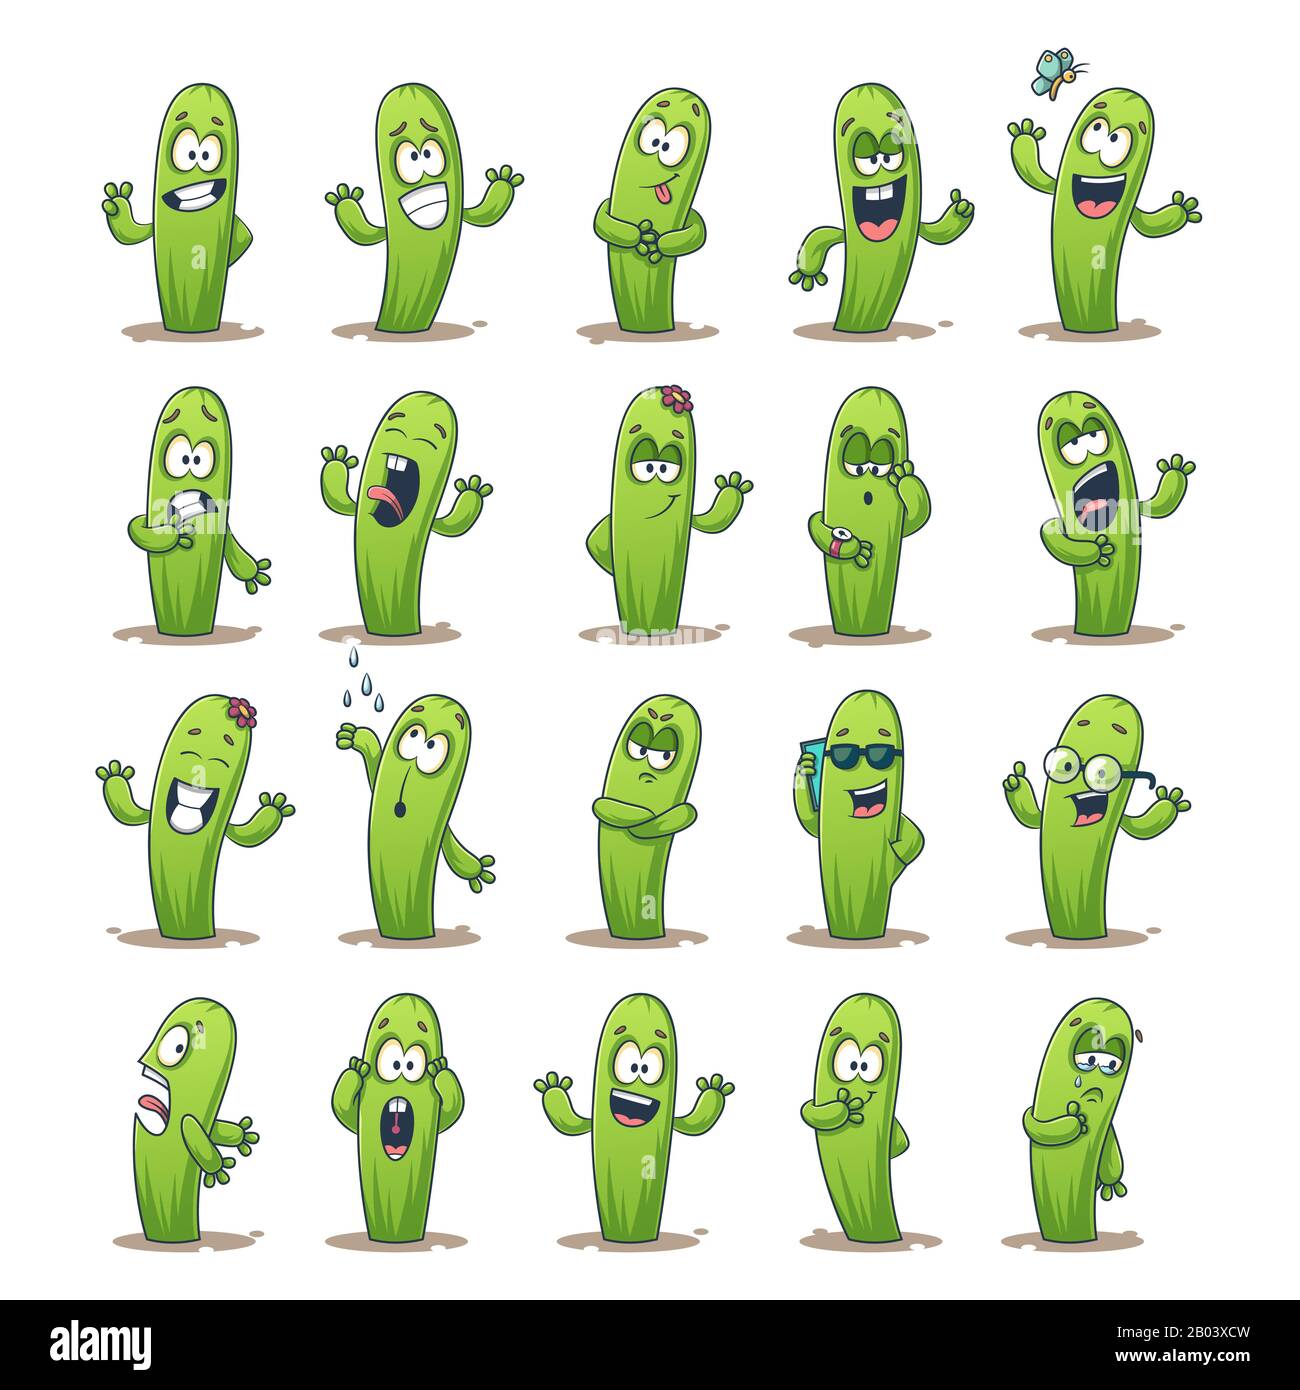 Cactus sticker set. Set of cute cartoon characters. Vector collection for stickers, patches, badges, pins. Stock Vector